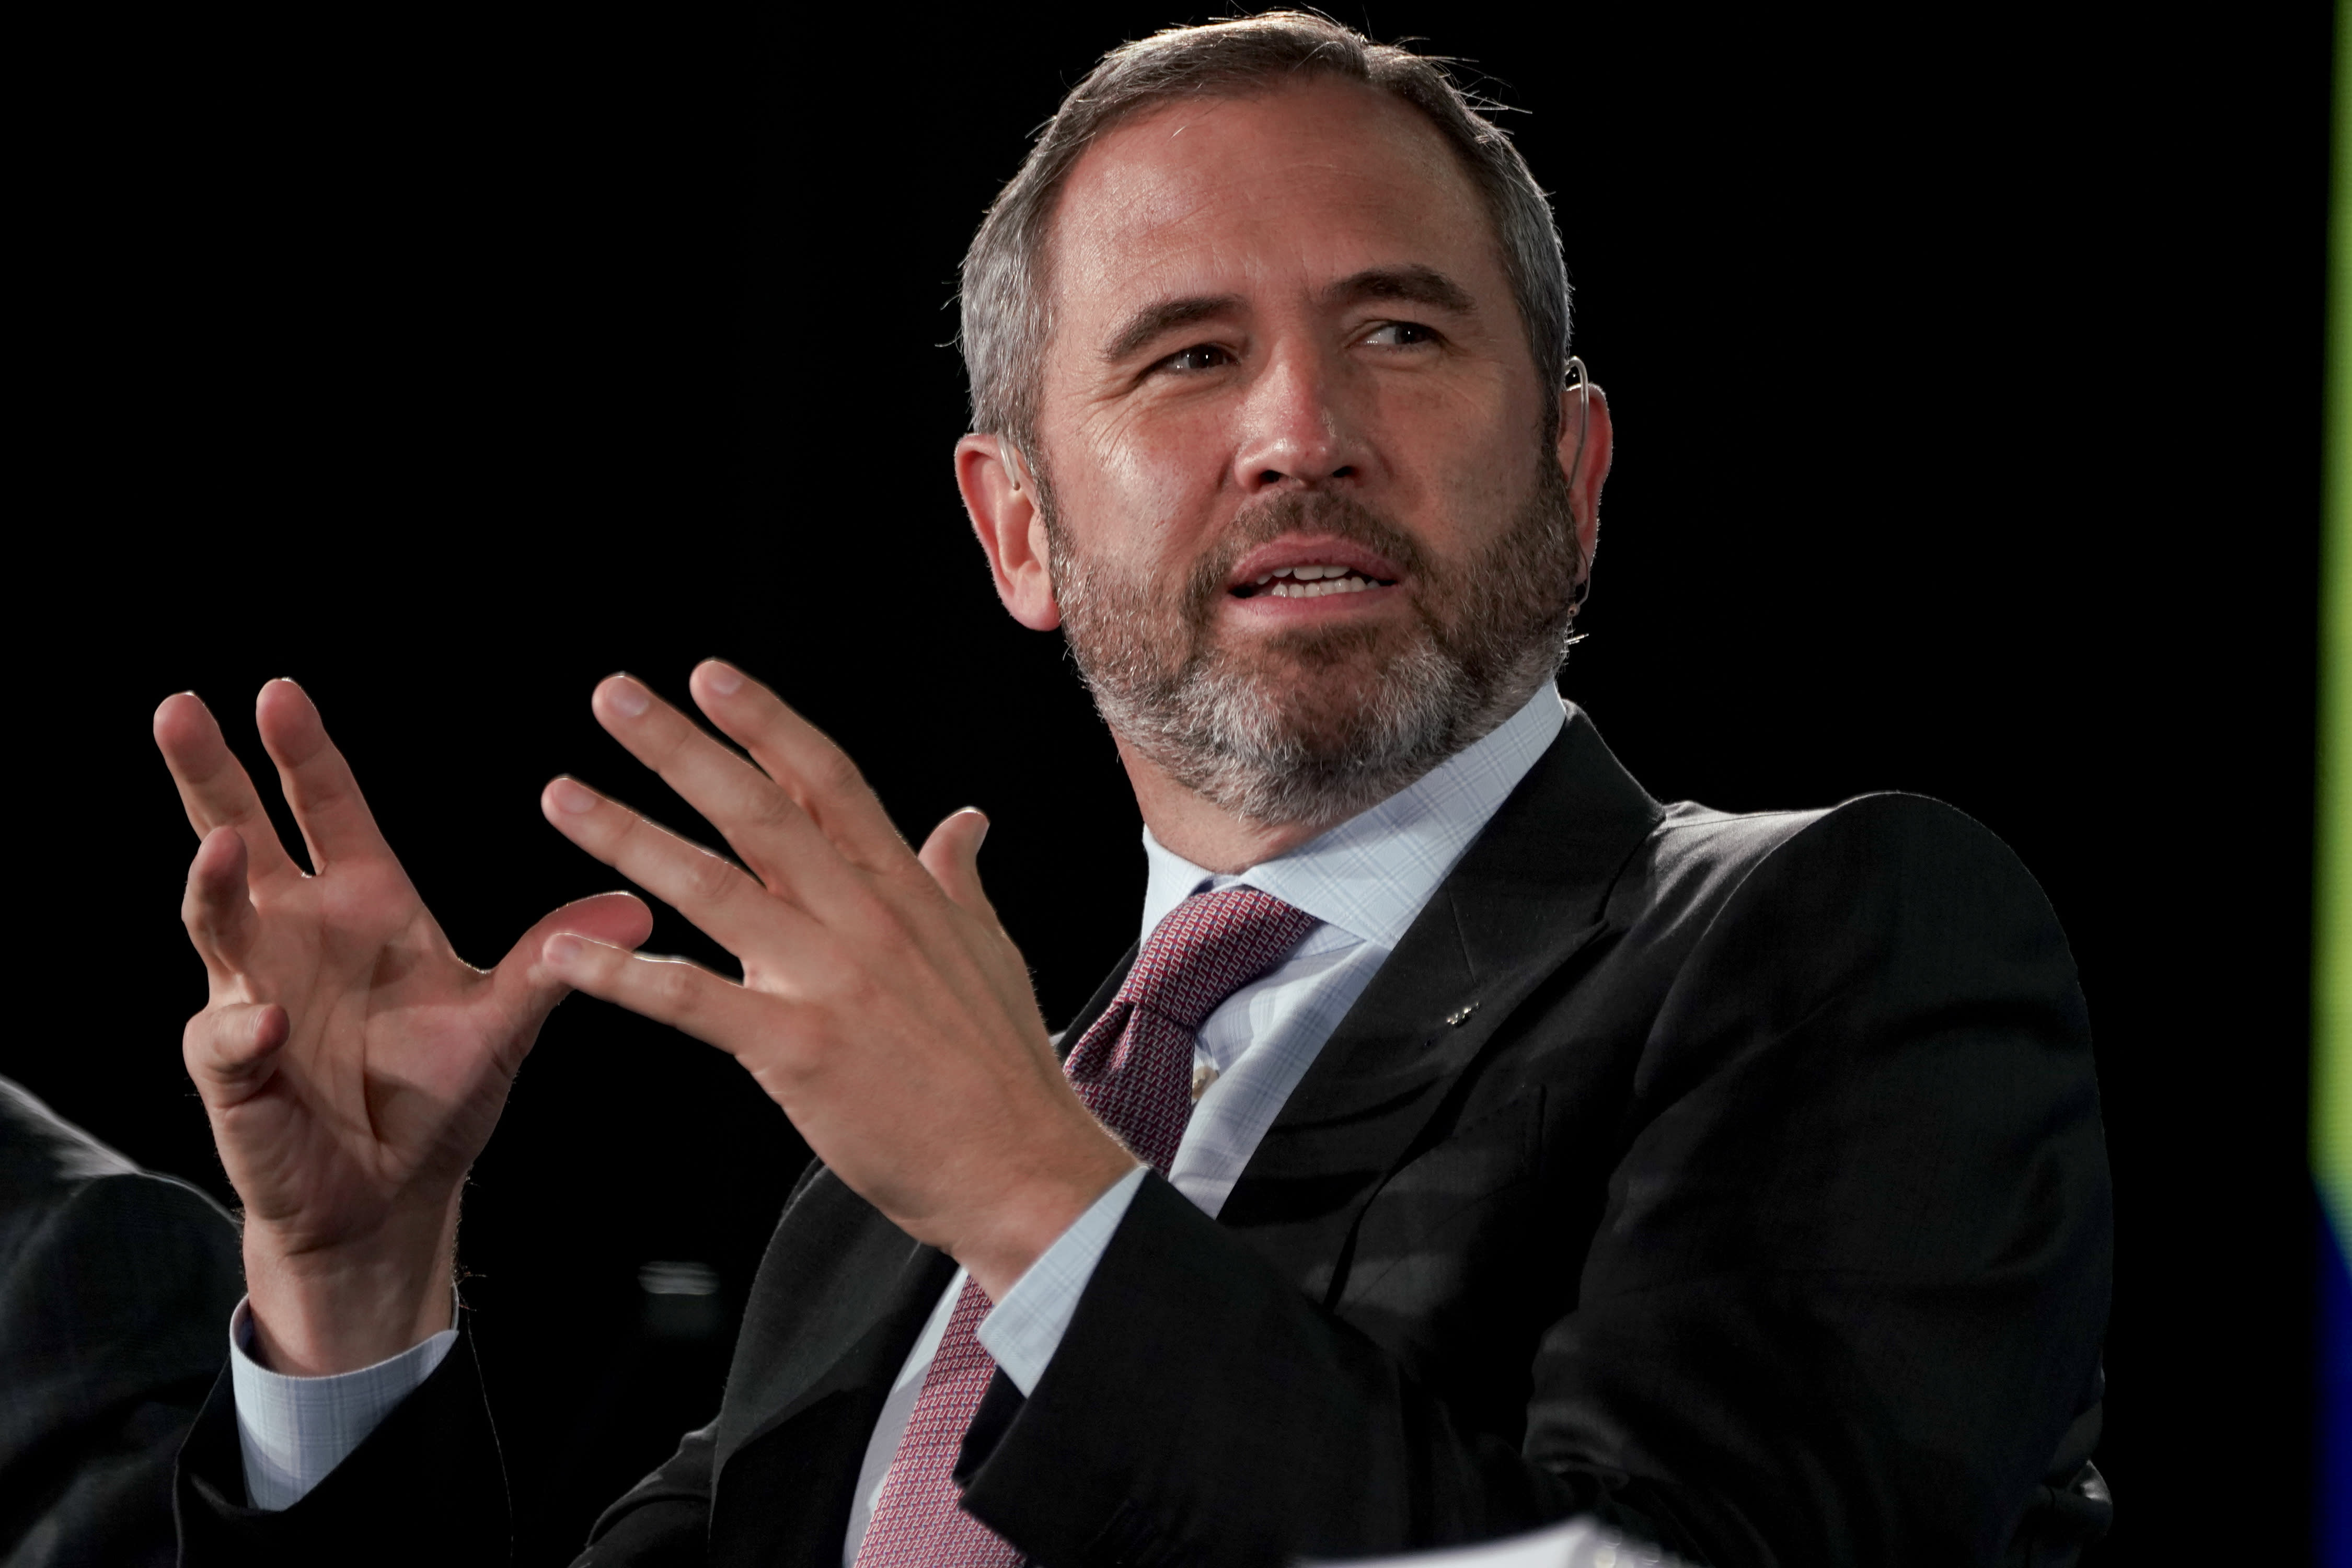 Ripple CEO is optimistic the crypto firm will get ruling on XRP lawsuit soon, slams 'embarrassing' SEC